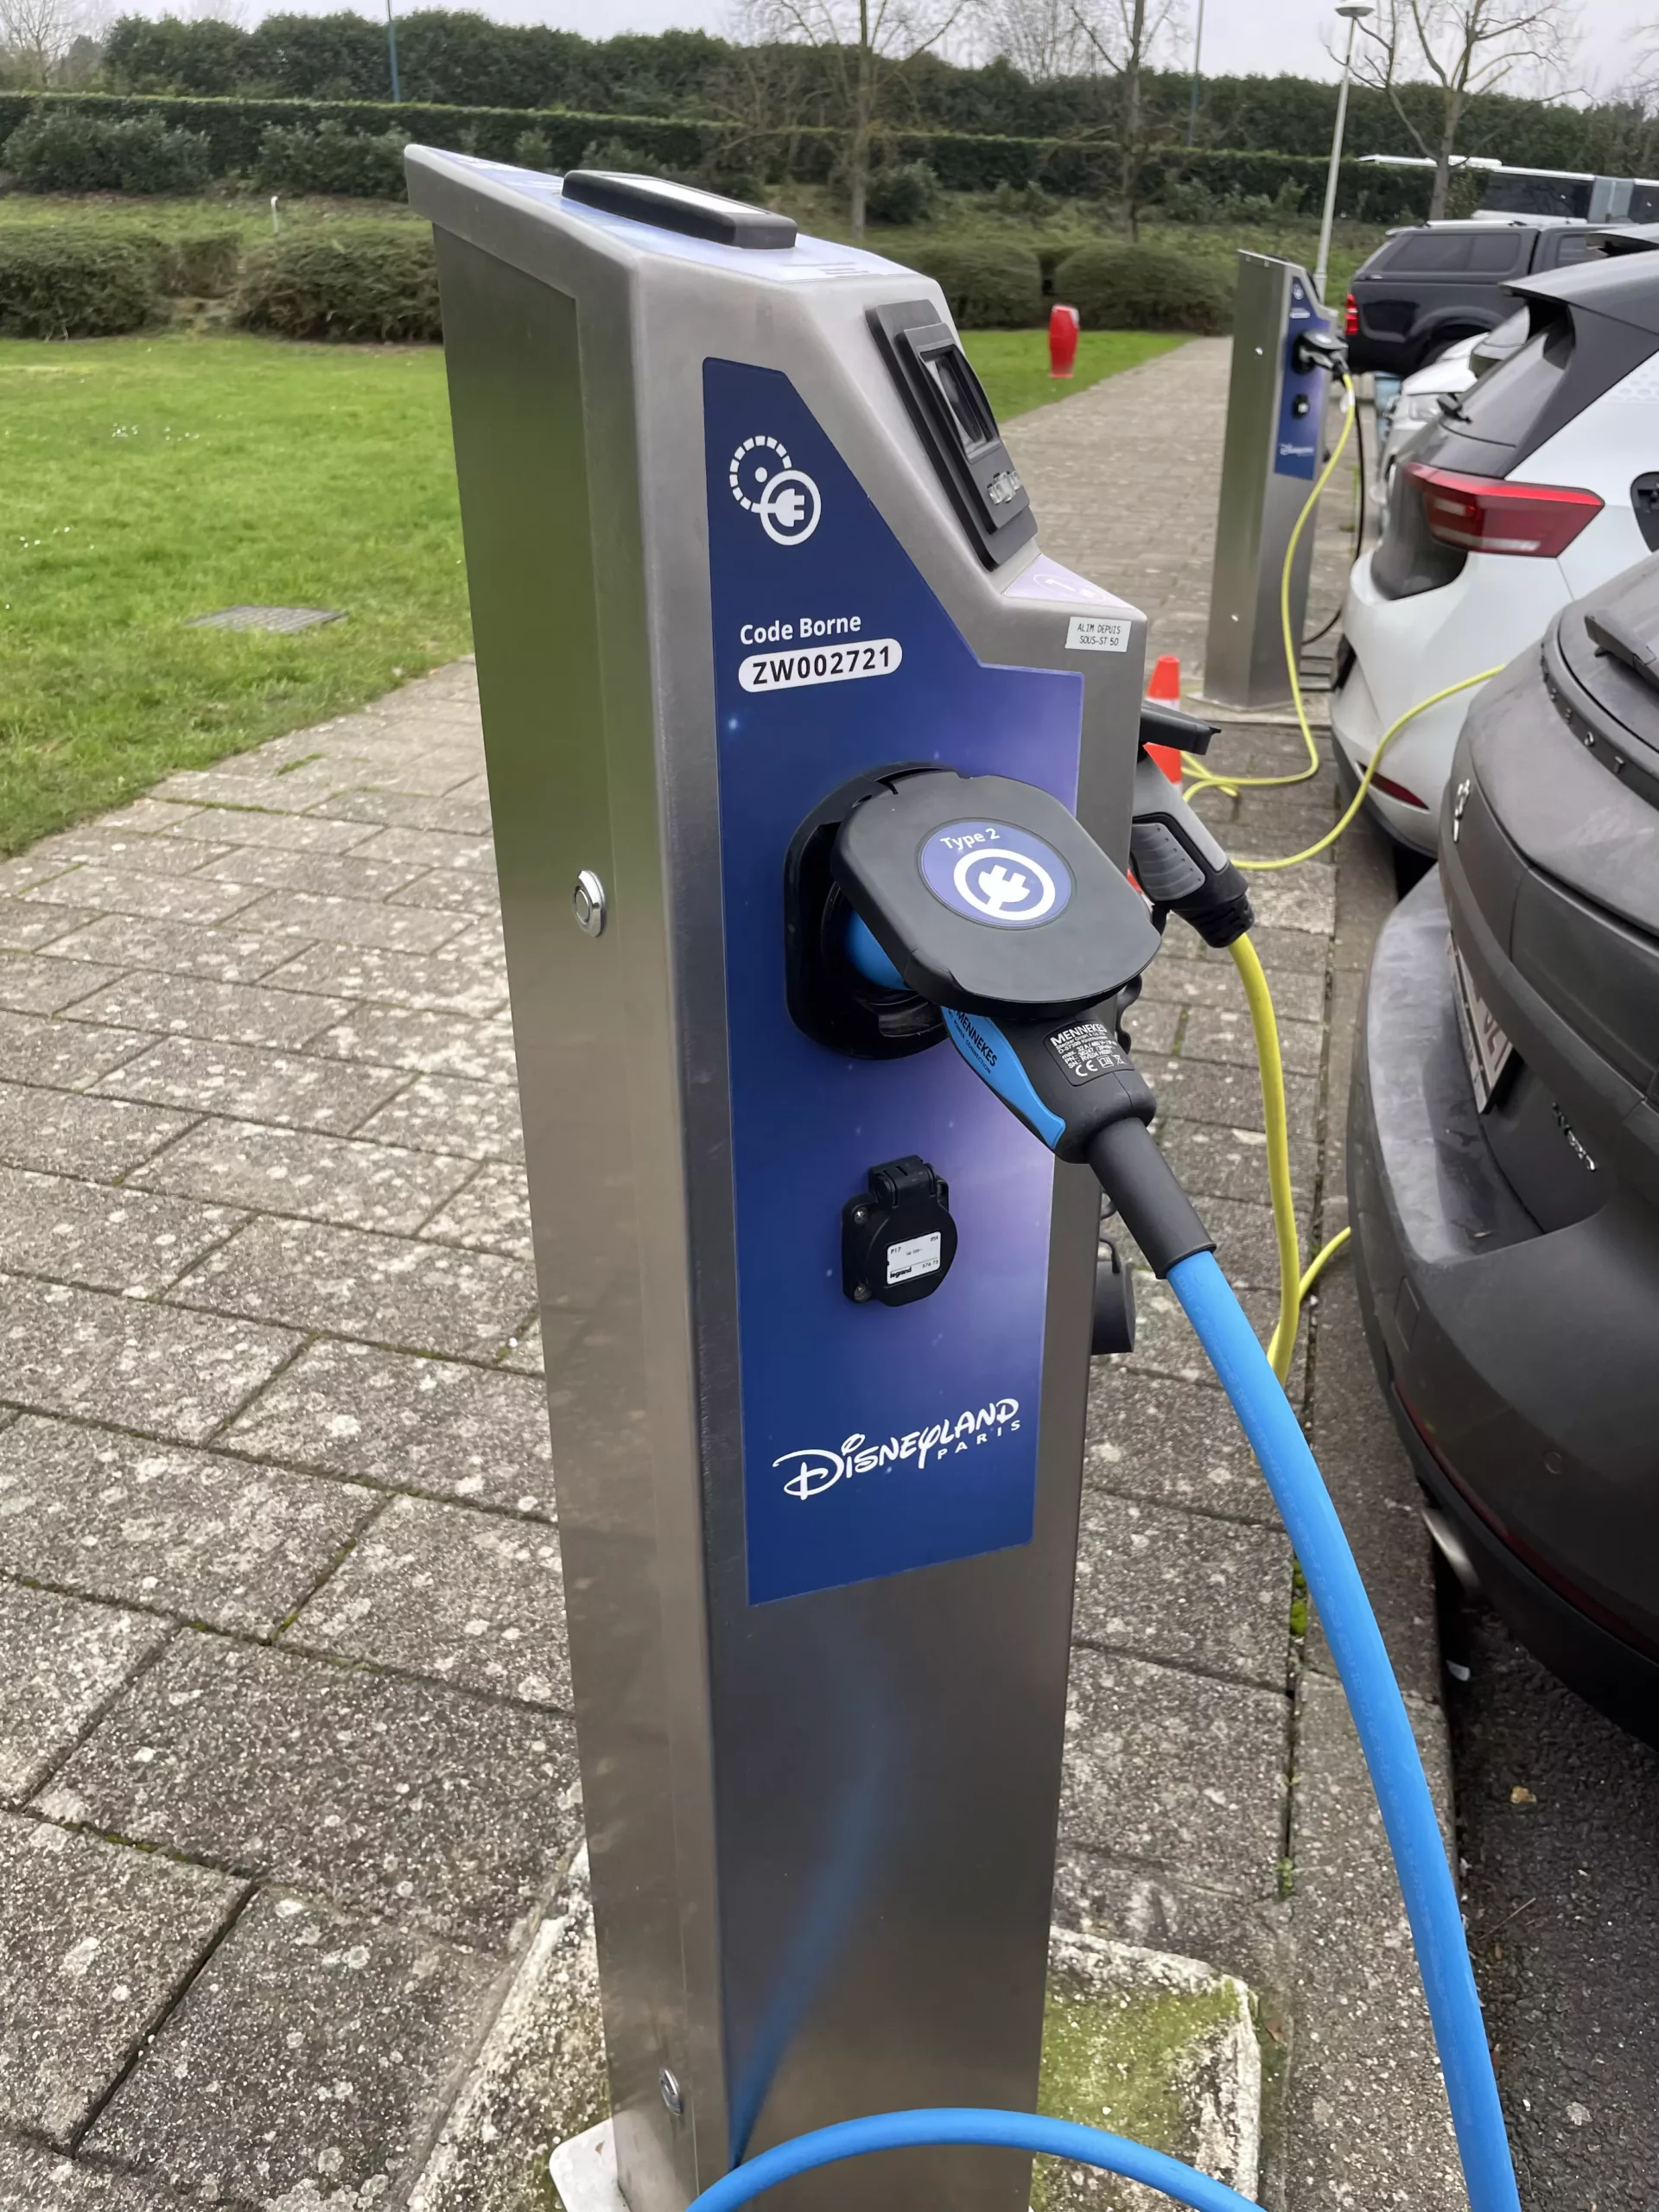 Visiting Disneyland Paris in an Electric Car Everything you Need to Know